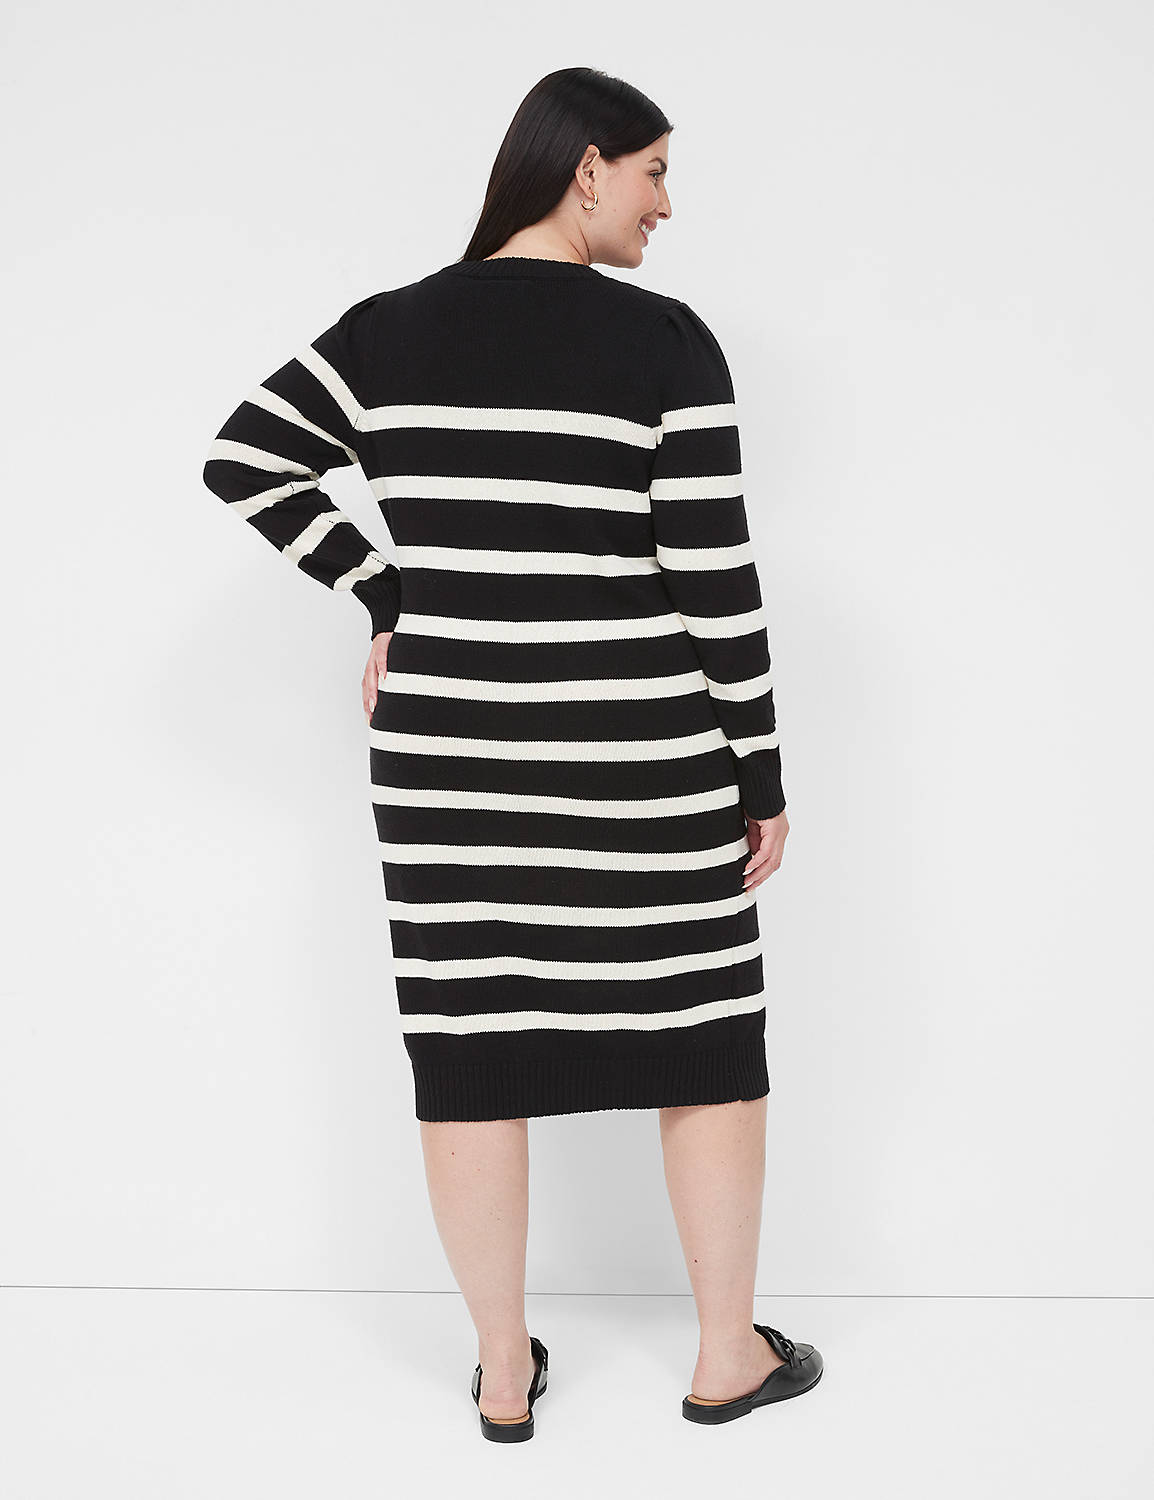 Long Puff Sleeve Striped Crew Neck Product Image 2